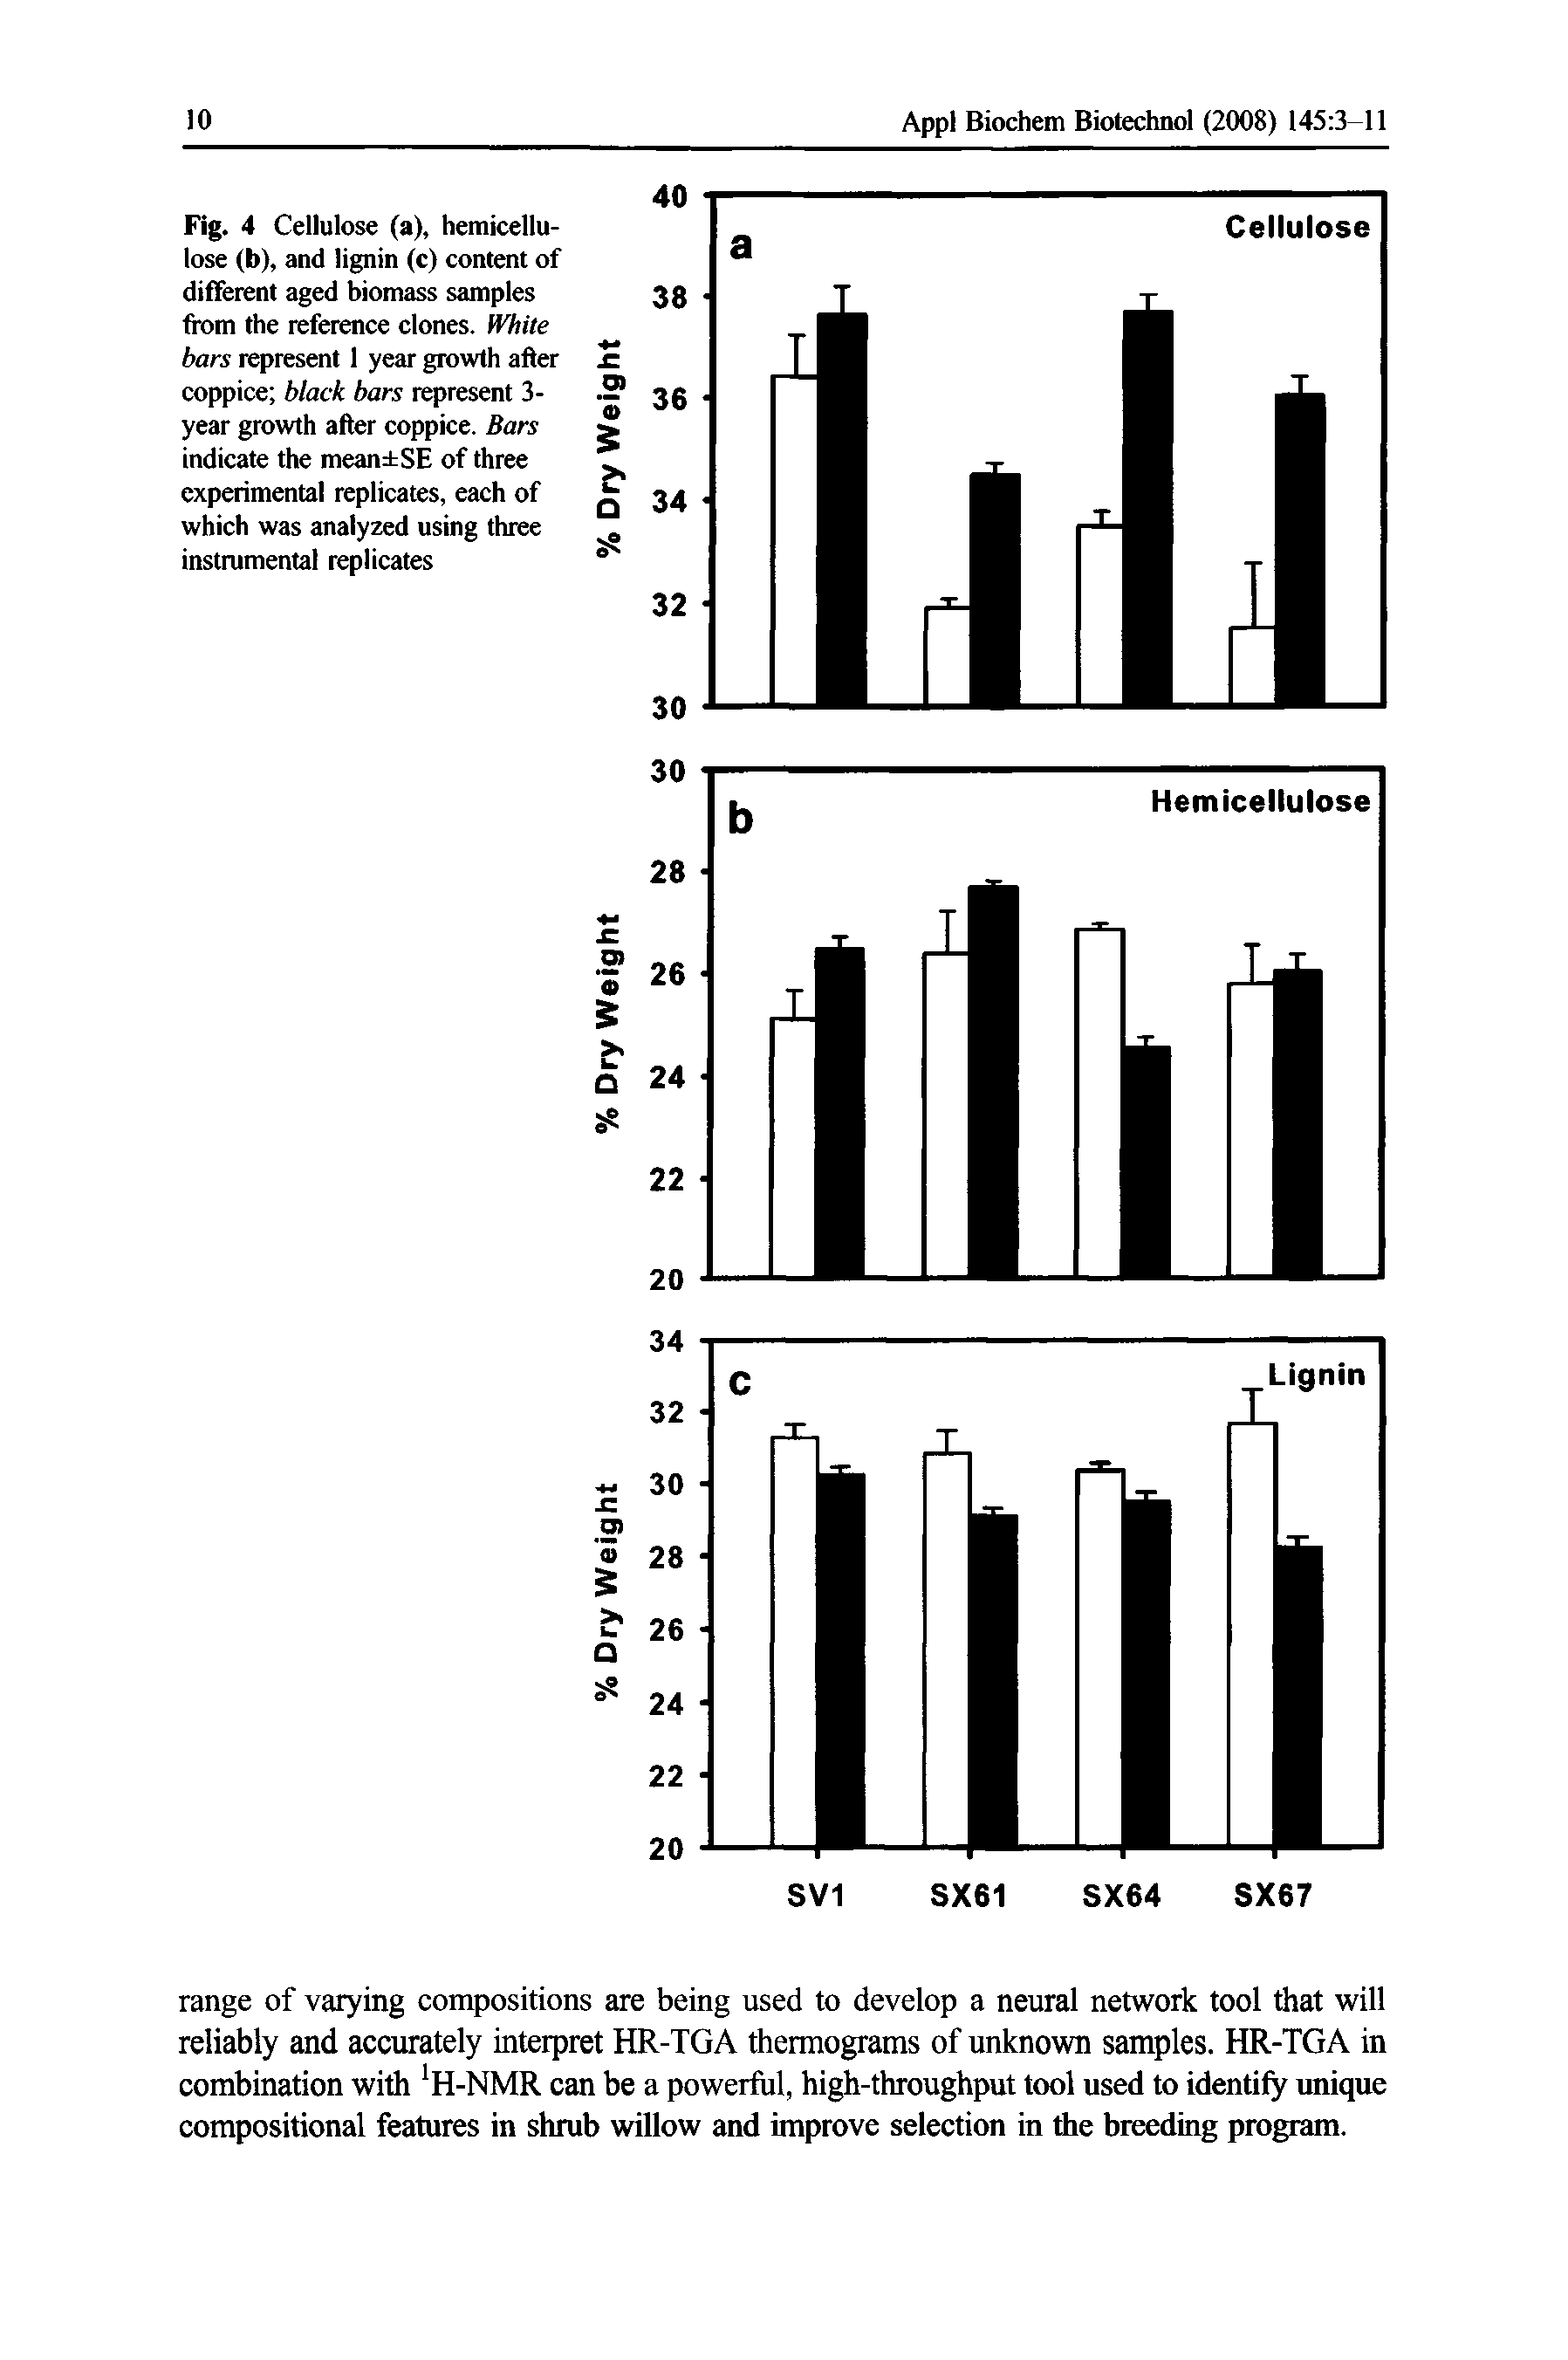 Fig. 4 Cellulose (a), hemicellu-lose (b), and lignin (c) content of different aged biomass samples from the reference clones. IVhile bars represent 1 year growth after eoppice black bars represent 3-year growth after coppice. Bars indicate the mean SE of three experimental replicates, each of which was analyzed using three instrumental replieates...